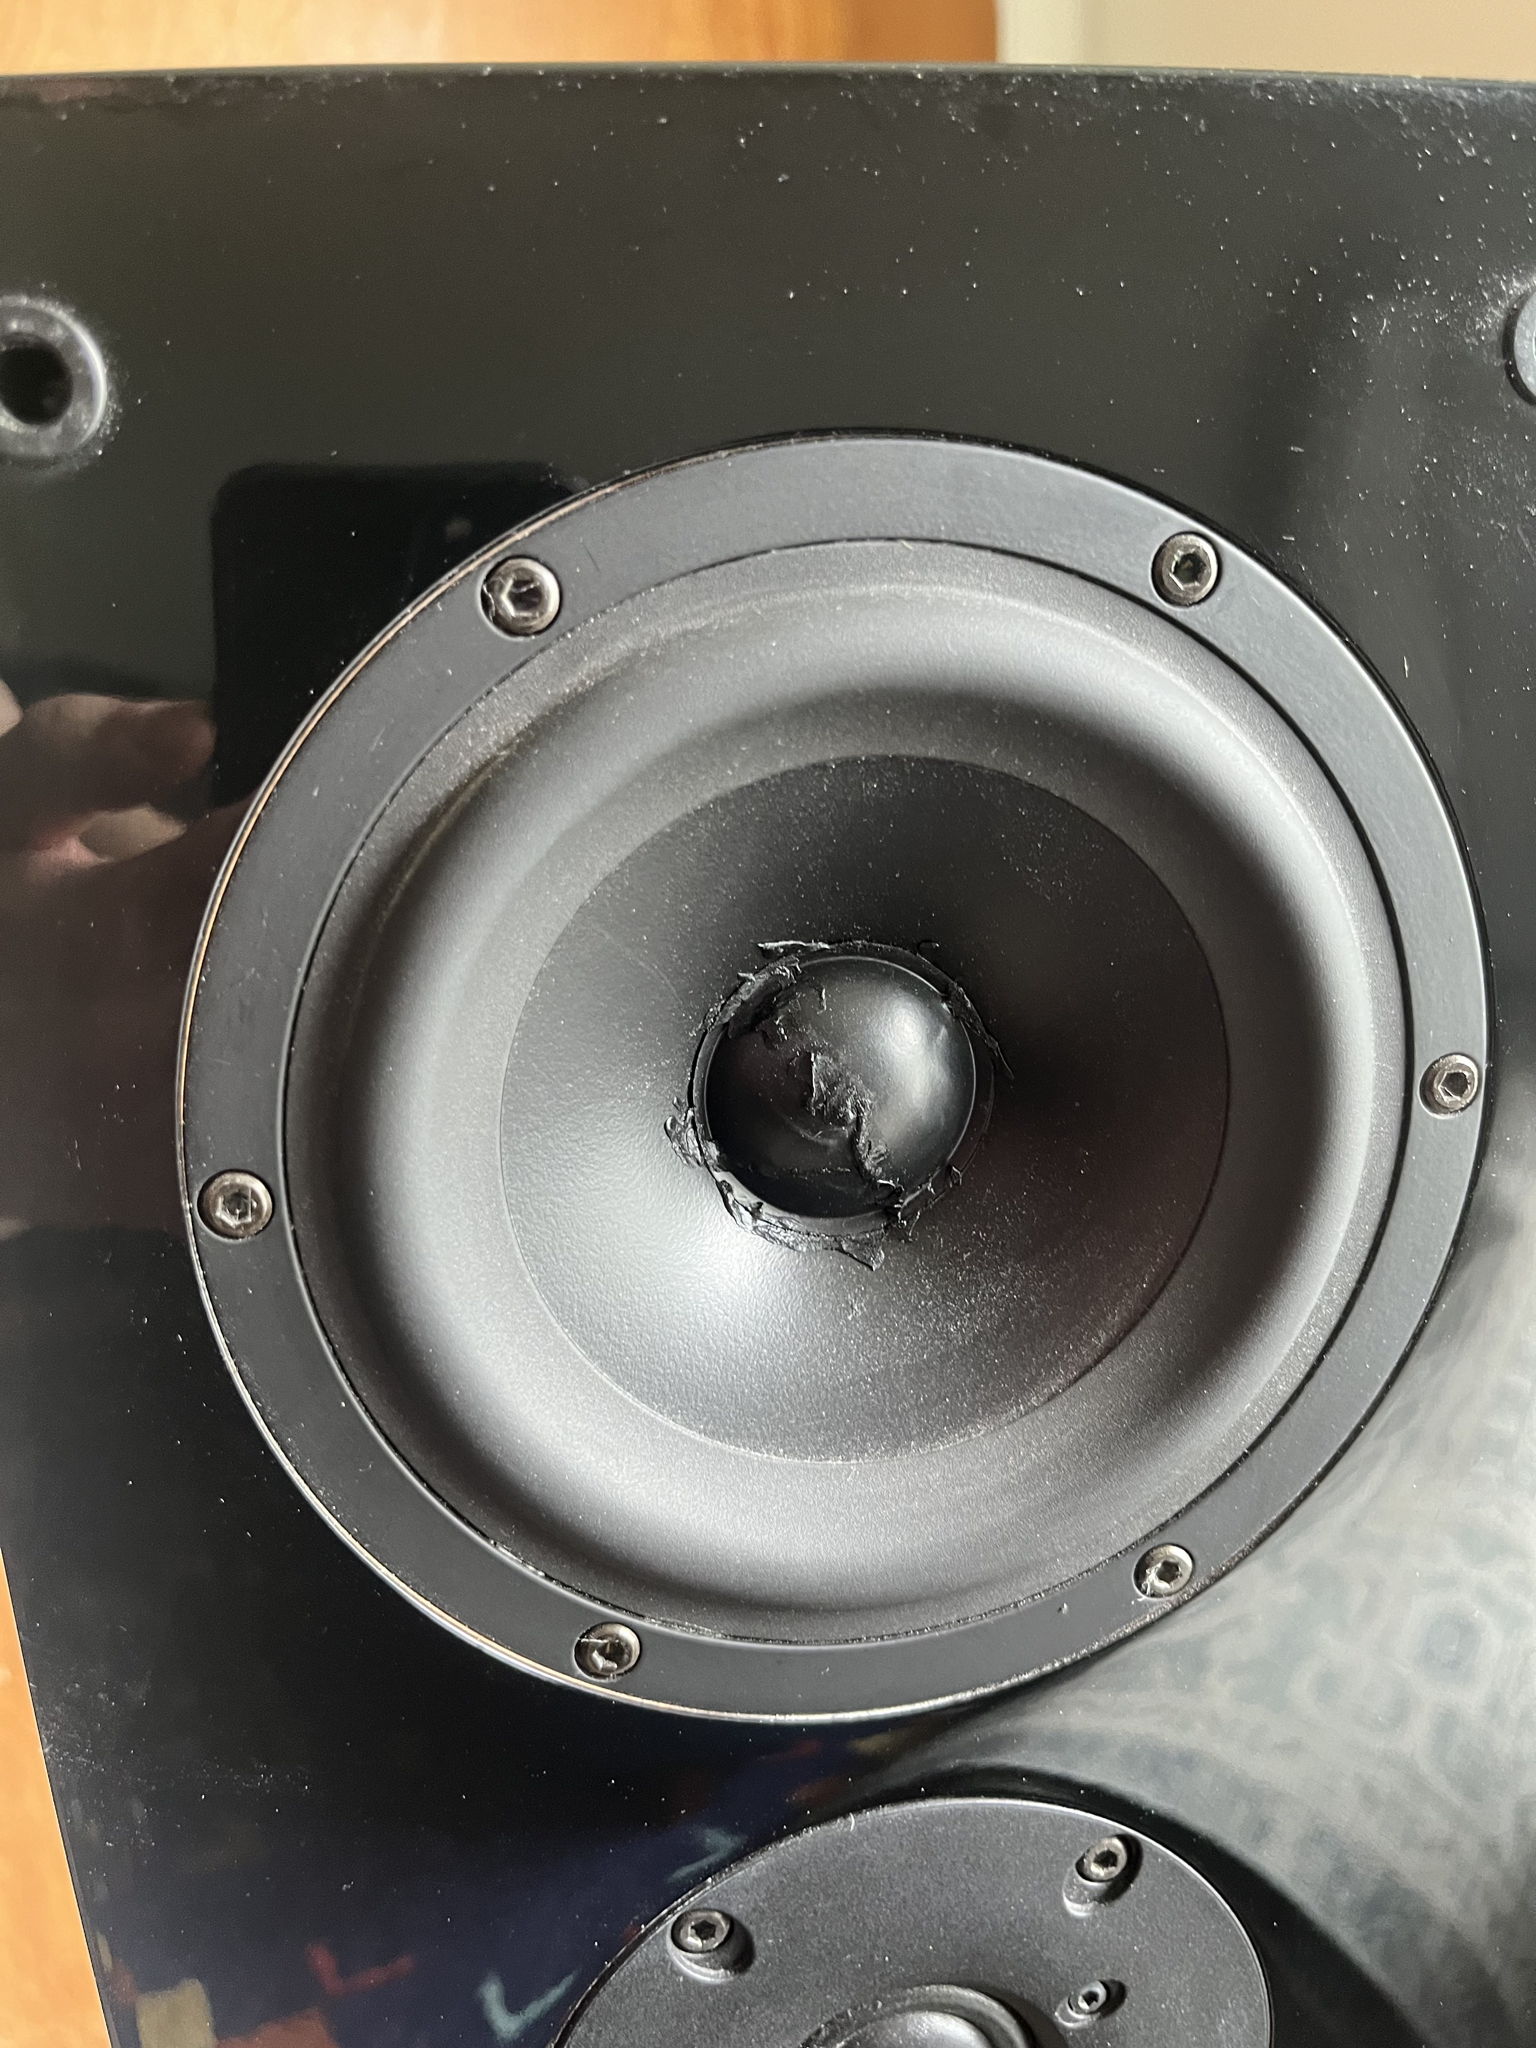 12 years ago one of the speakers made a buzzing sound and we had a professional audio technician repair it with special adhesive. They have been sounding perfect ever since.